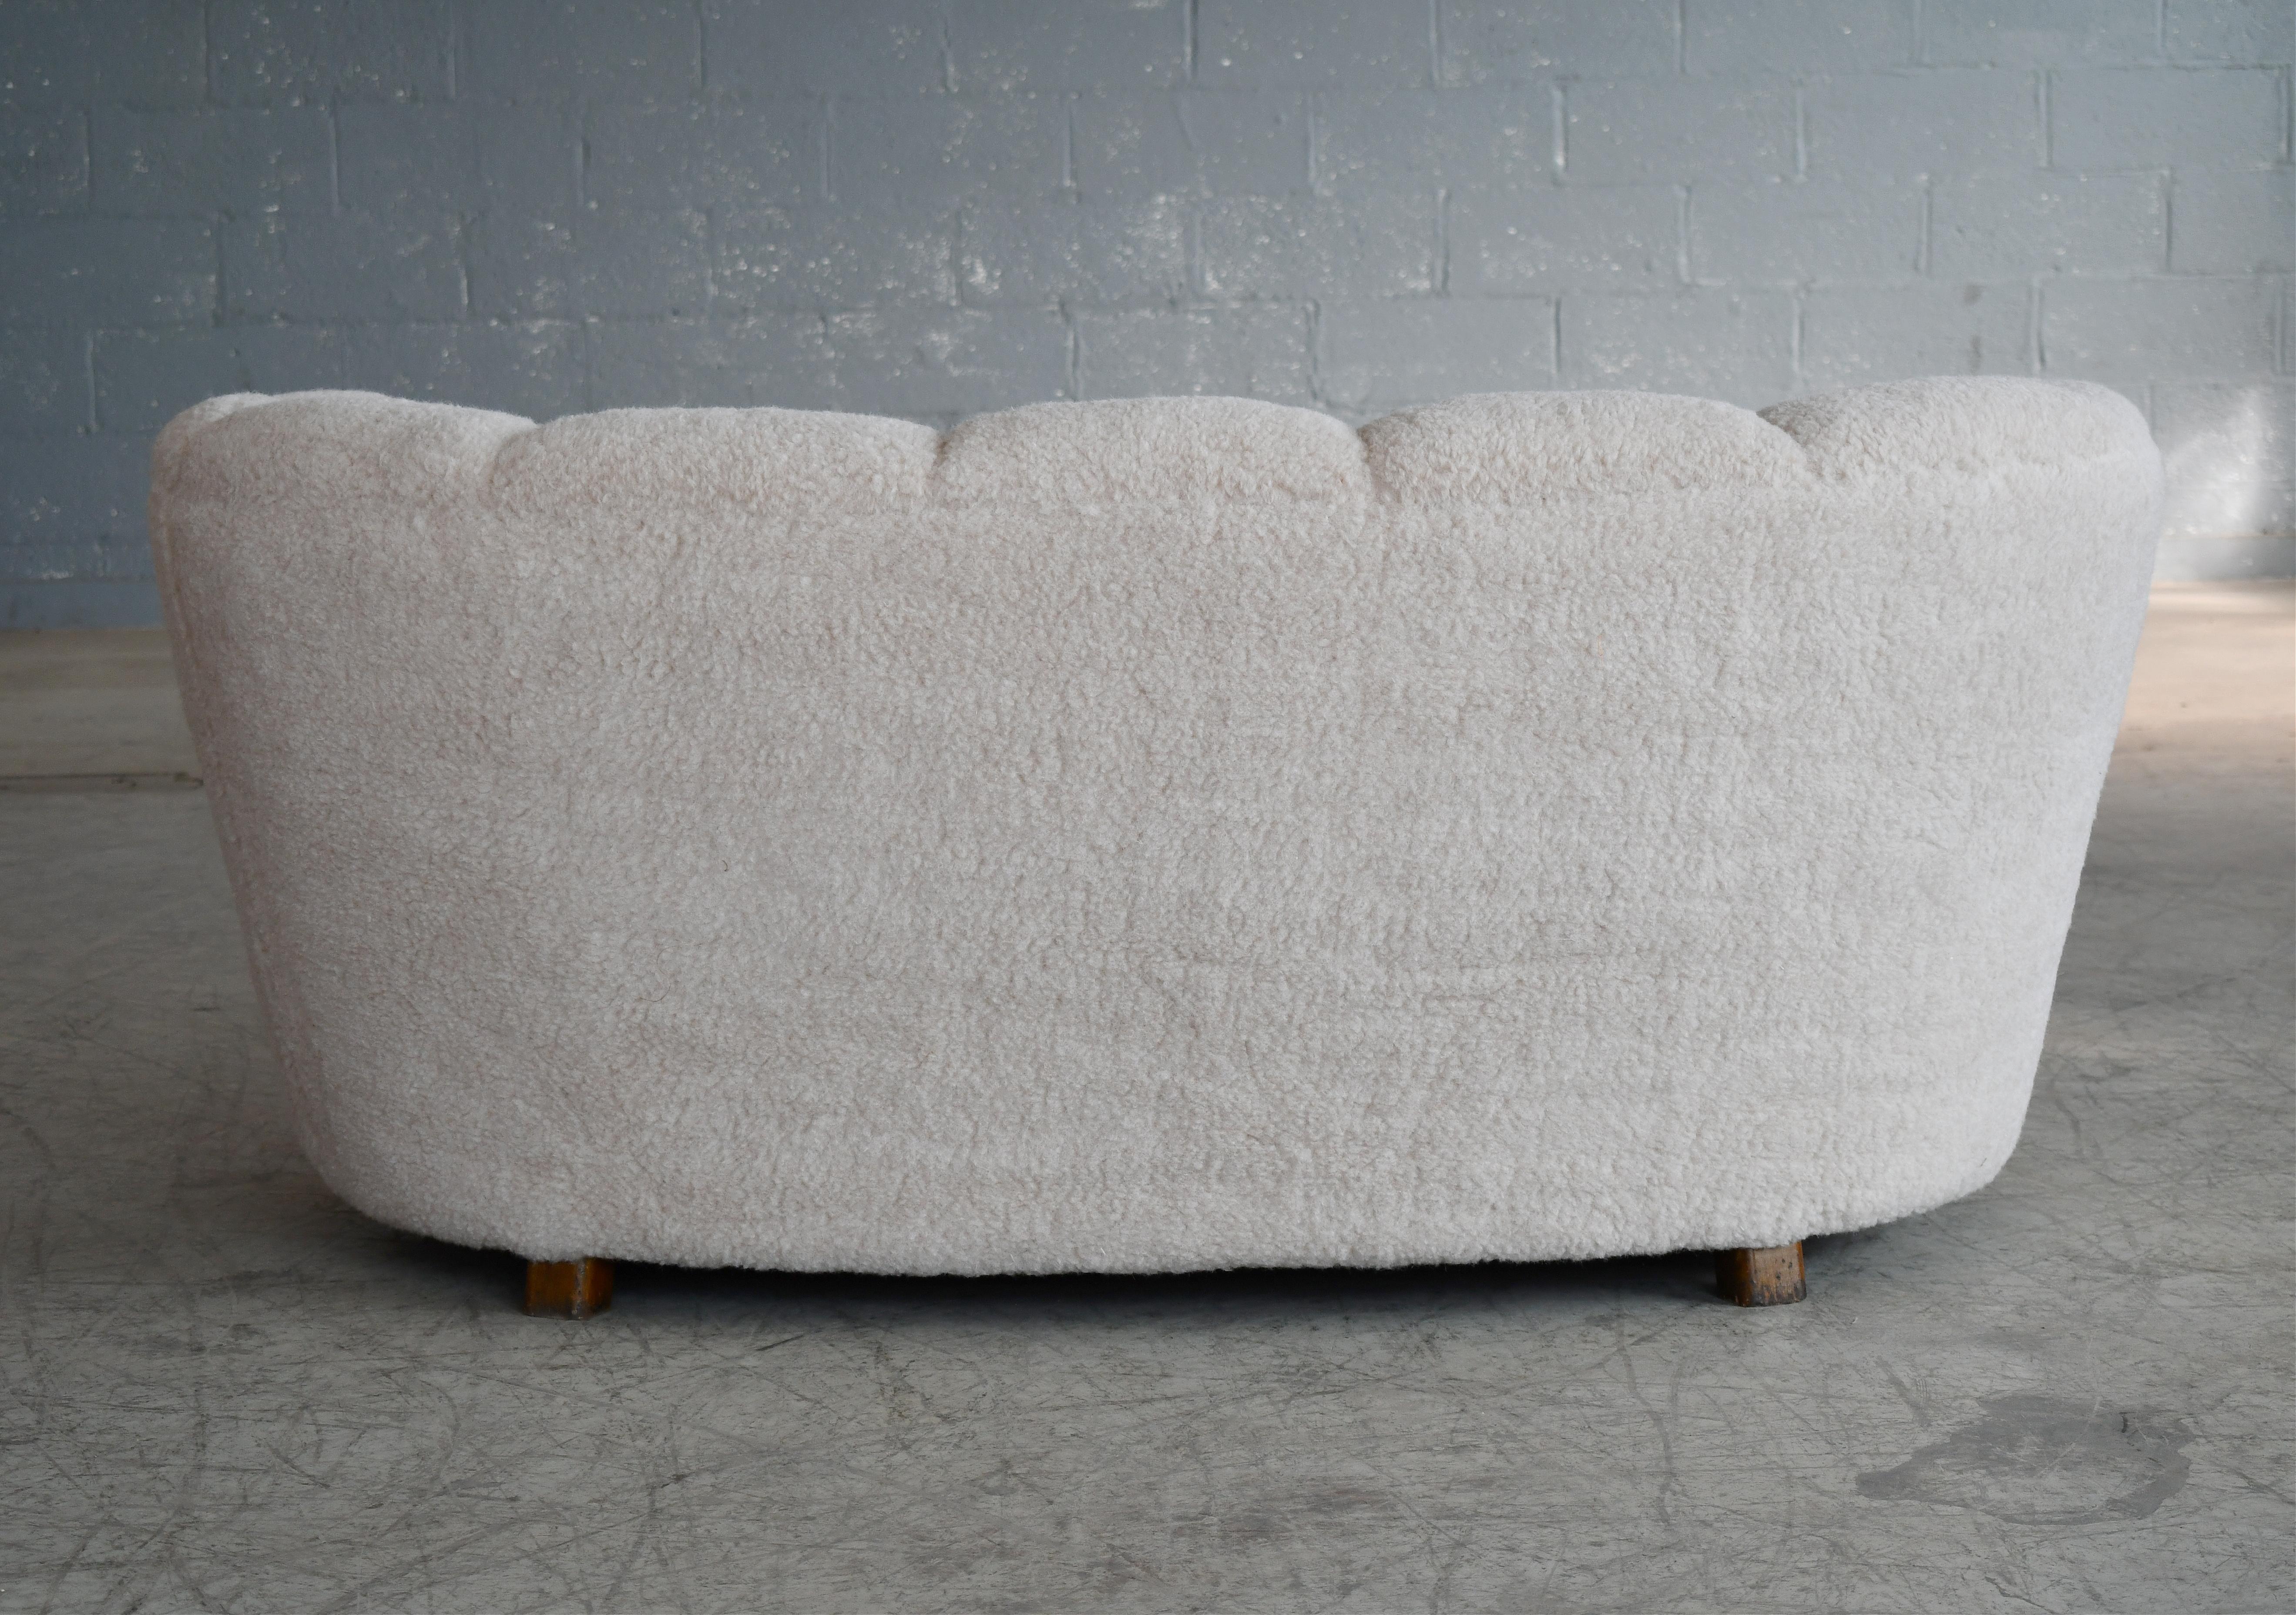 Danish 1940's Banana Shaped Curved Loveseat or Sofa Covered in Beige Lambswool 3